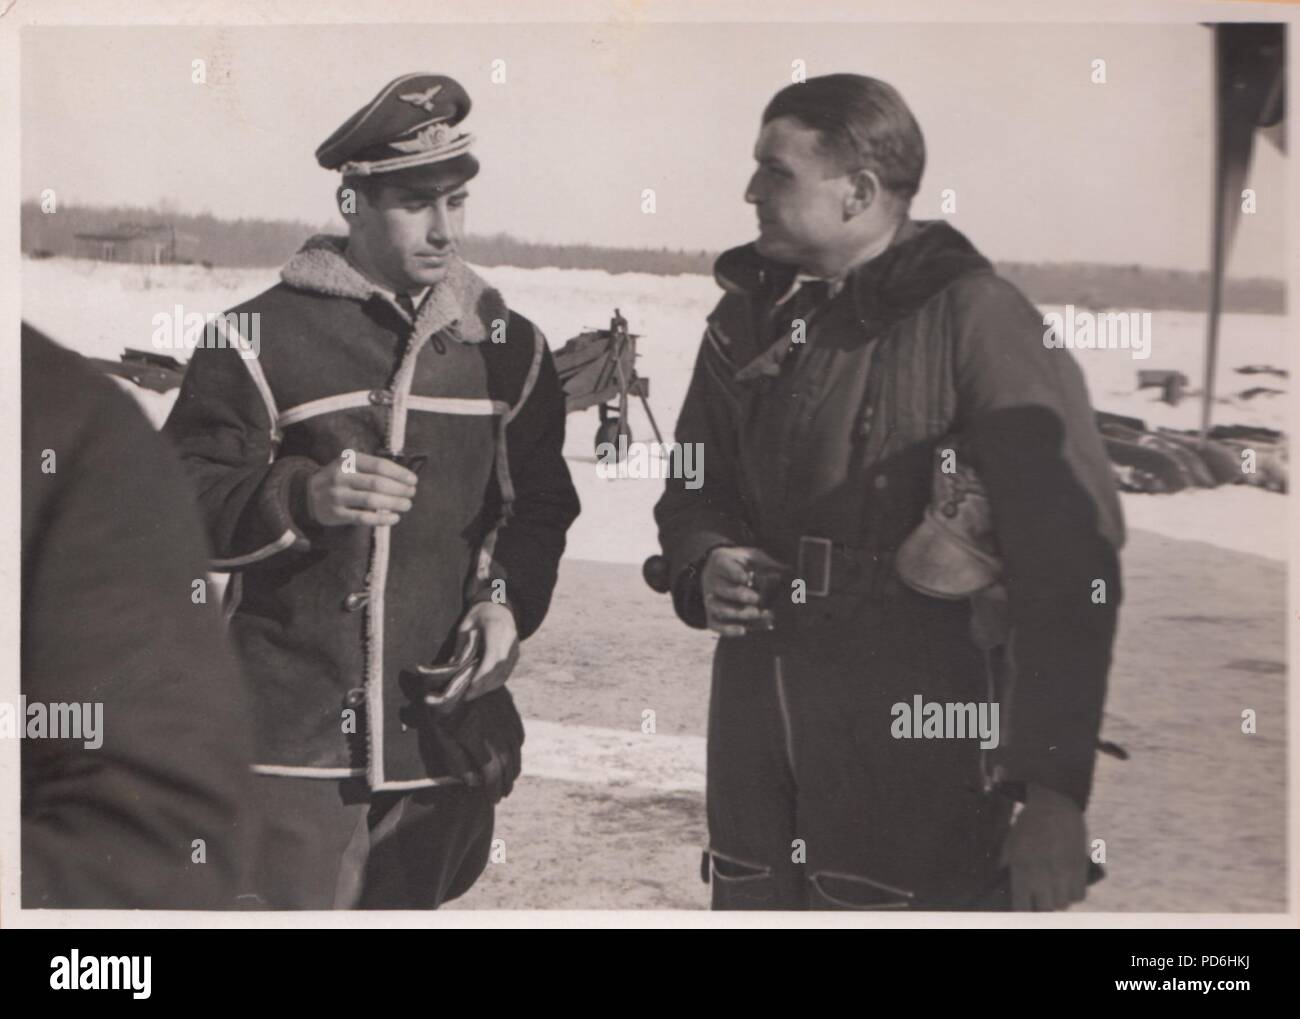 Image from the photo album of Oberleutnant Oscar Müller of  Kampfgeschwader 1: Oberleutnant Hans Sumpf (on right) at Dno Airfield in Russia in 1942. Sumpf was Staffelkapitän of 5./KG1 from 7th October 1941 until his death on 26th March 1942. He was posthumously awarded the Ritterkreuz (Knight's Cross of the Iron Cross) on 20th August 1942. Stock Photo